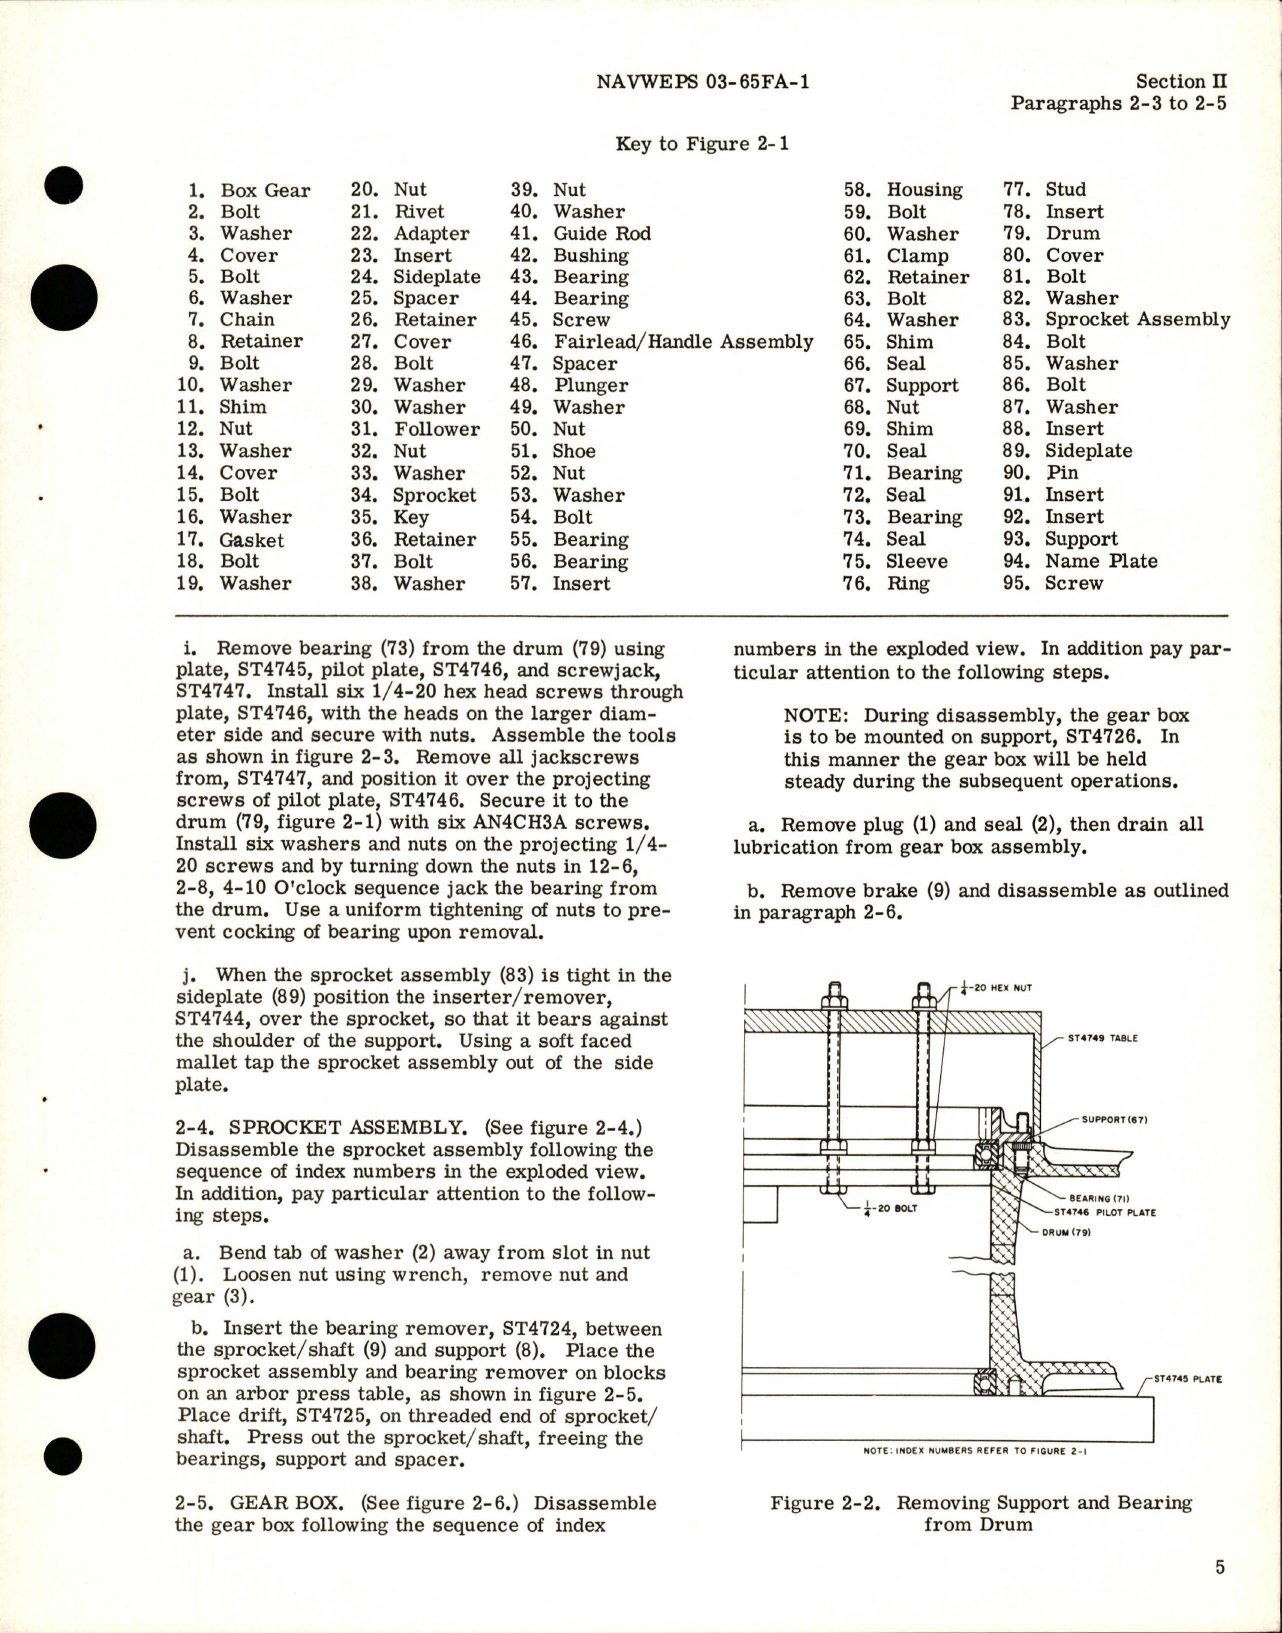 Sample page 9 from AirCorps Library document: Overhaul Instructions for Vermoor Winch Assembly - Part 172750